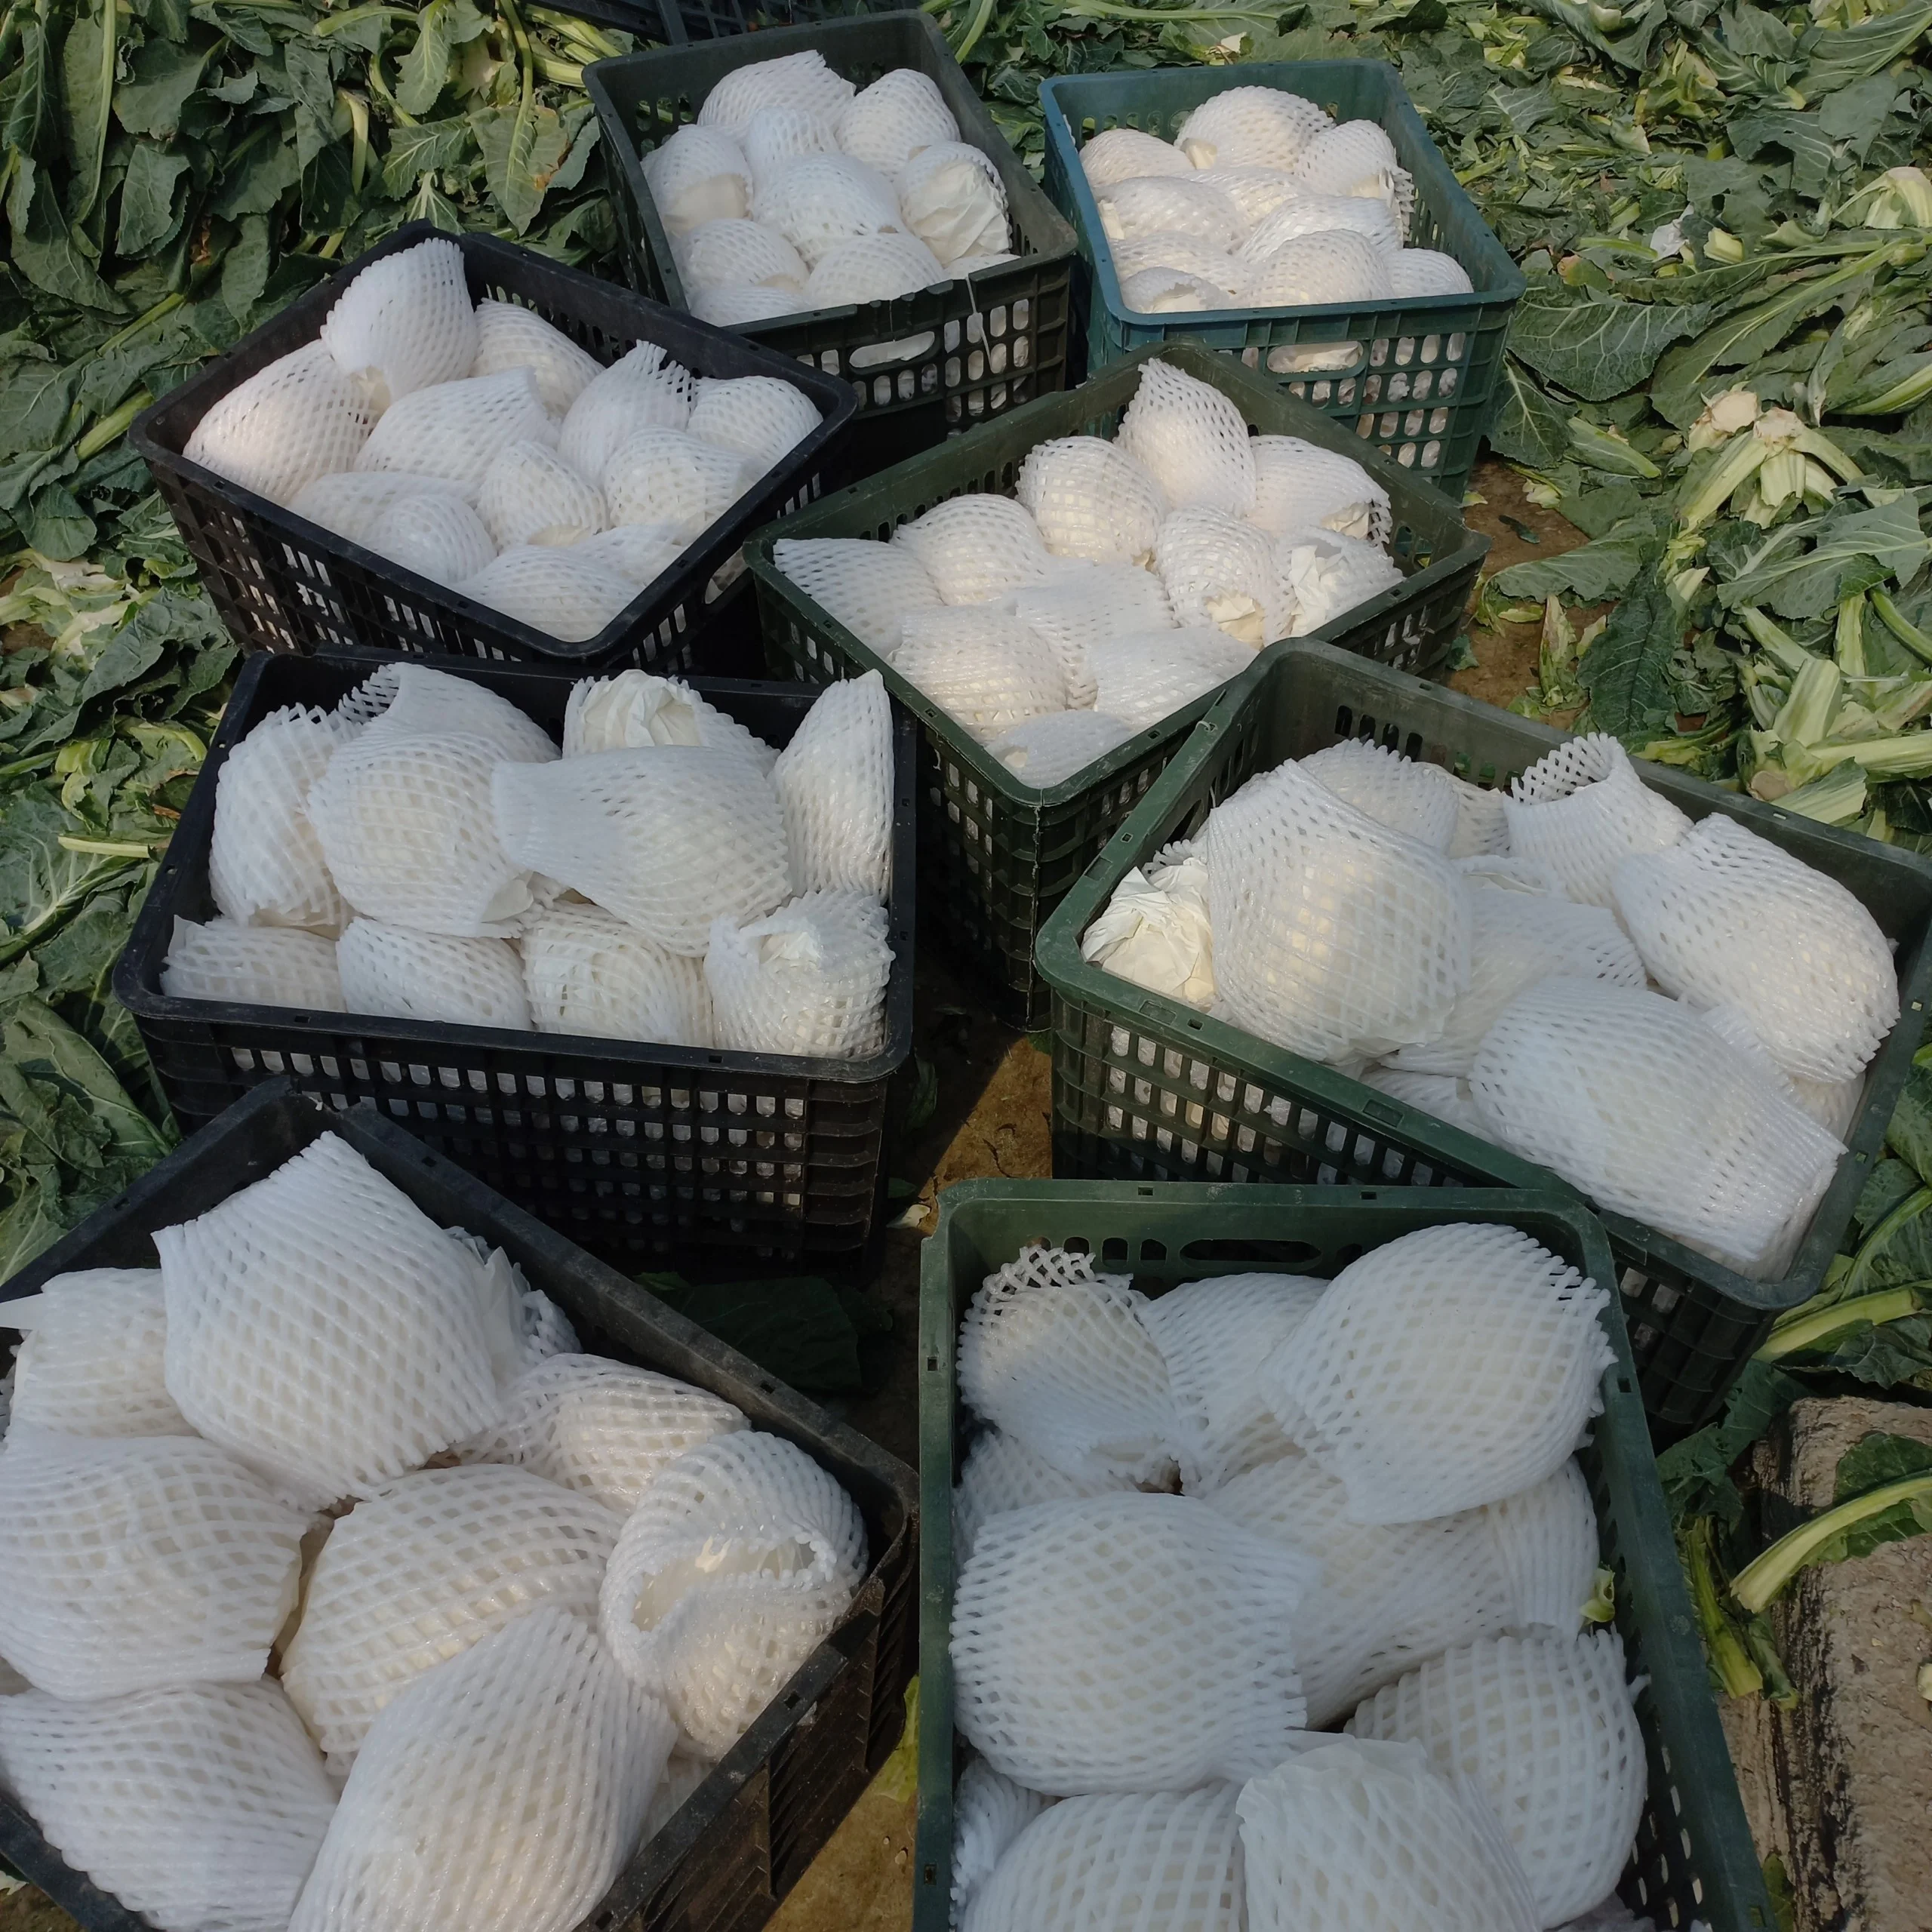 Premium Cauliflower Florets for Export from Vietnam with Skillfully Selected, Painstakingly Packed